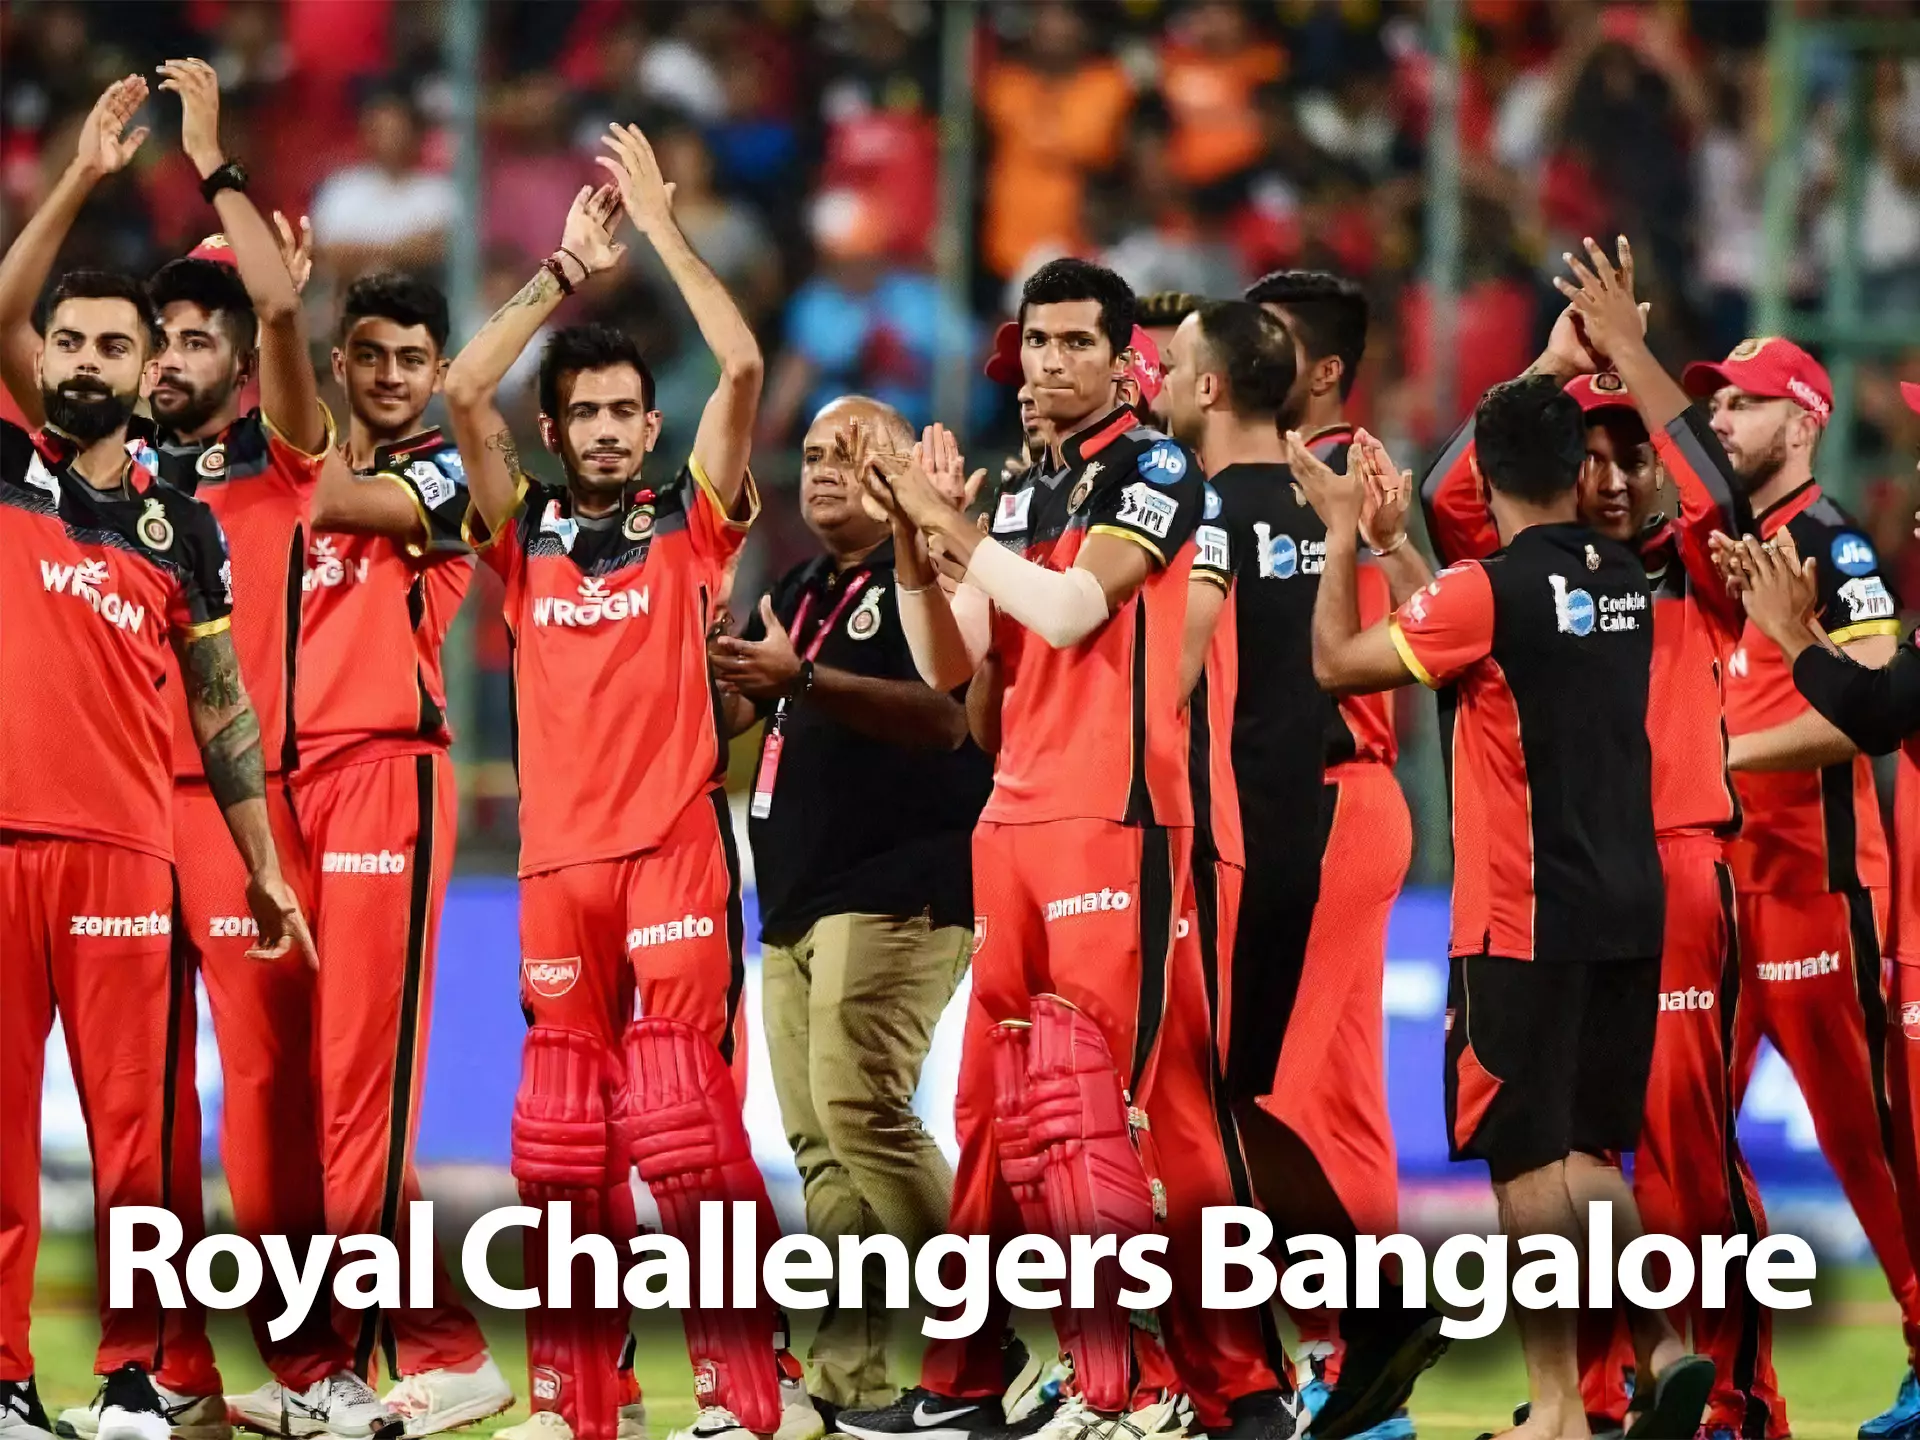 Follow the RCB success and bet on it at the best IPL betting sites in India.